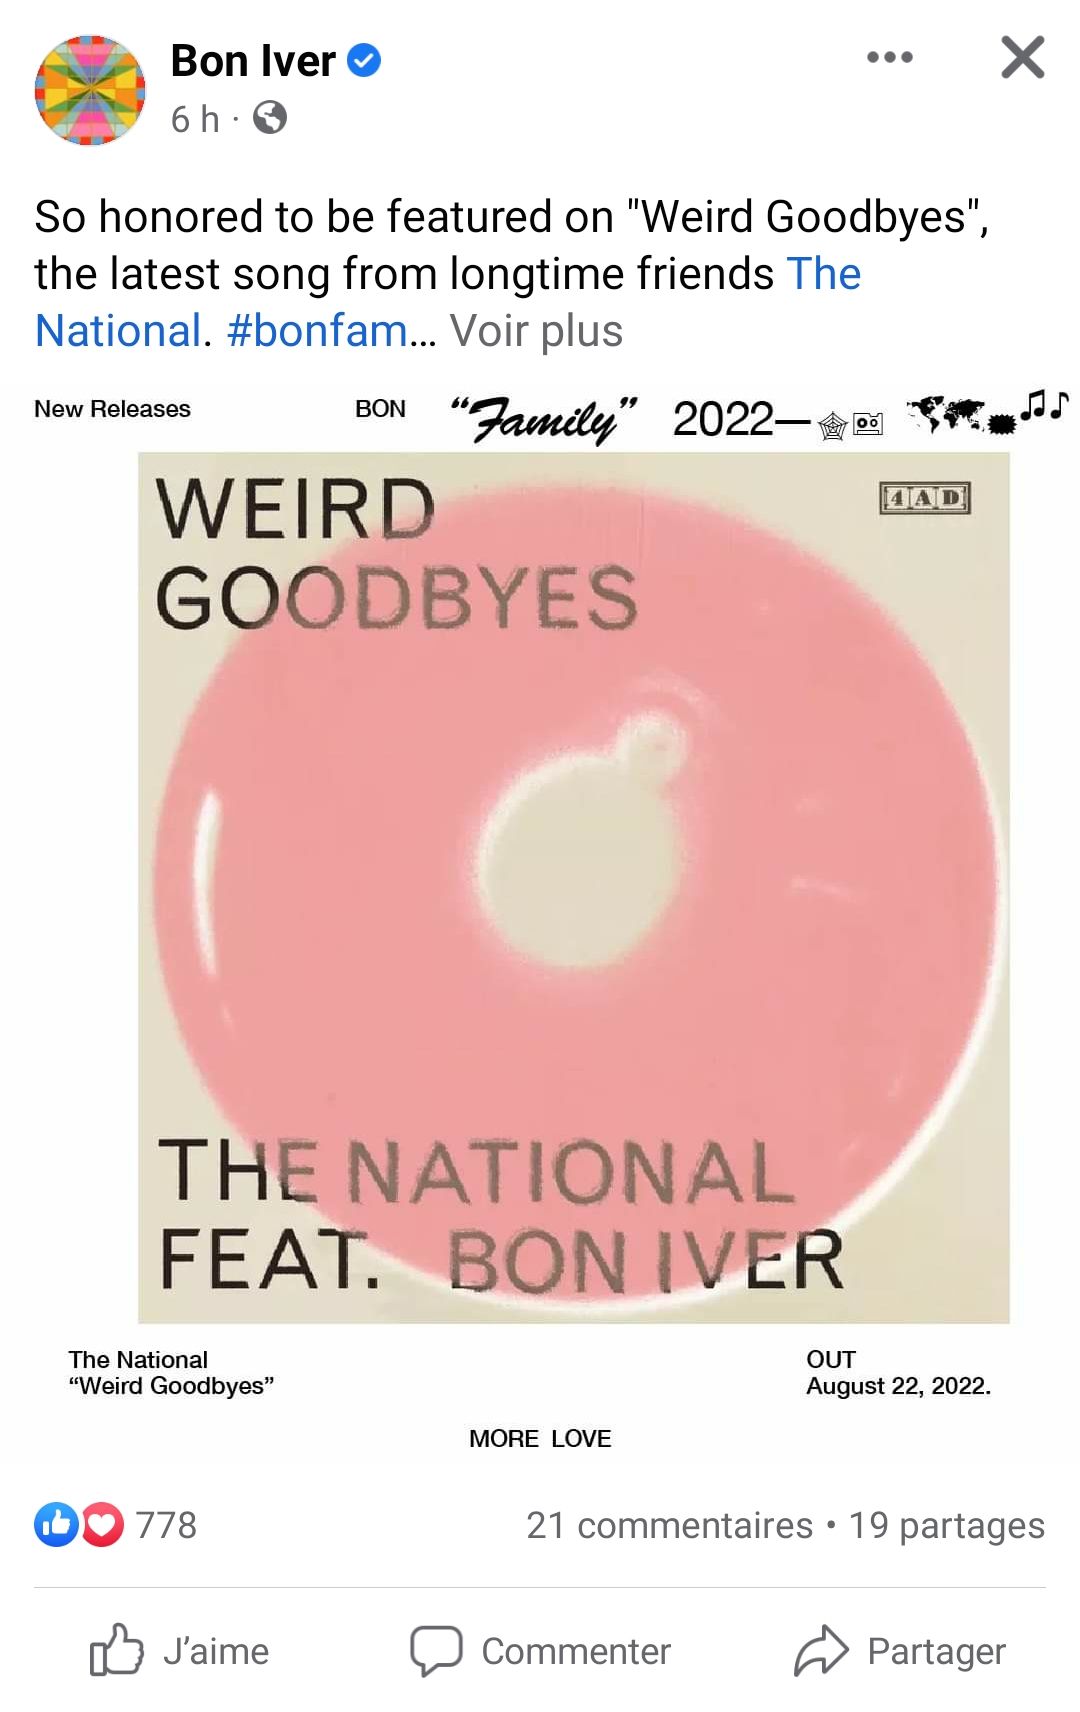 Weird goodbyes album of The national feat. Bon Iver